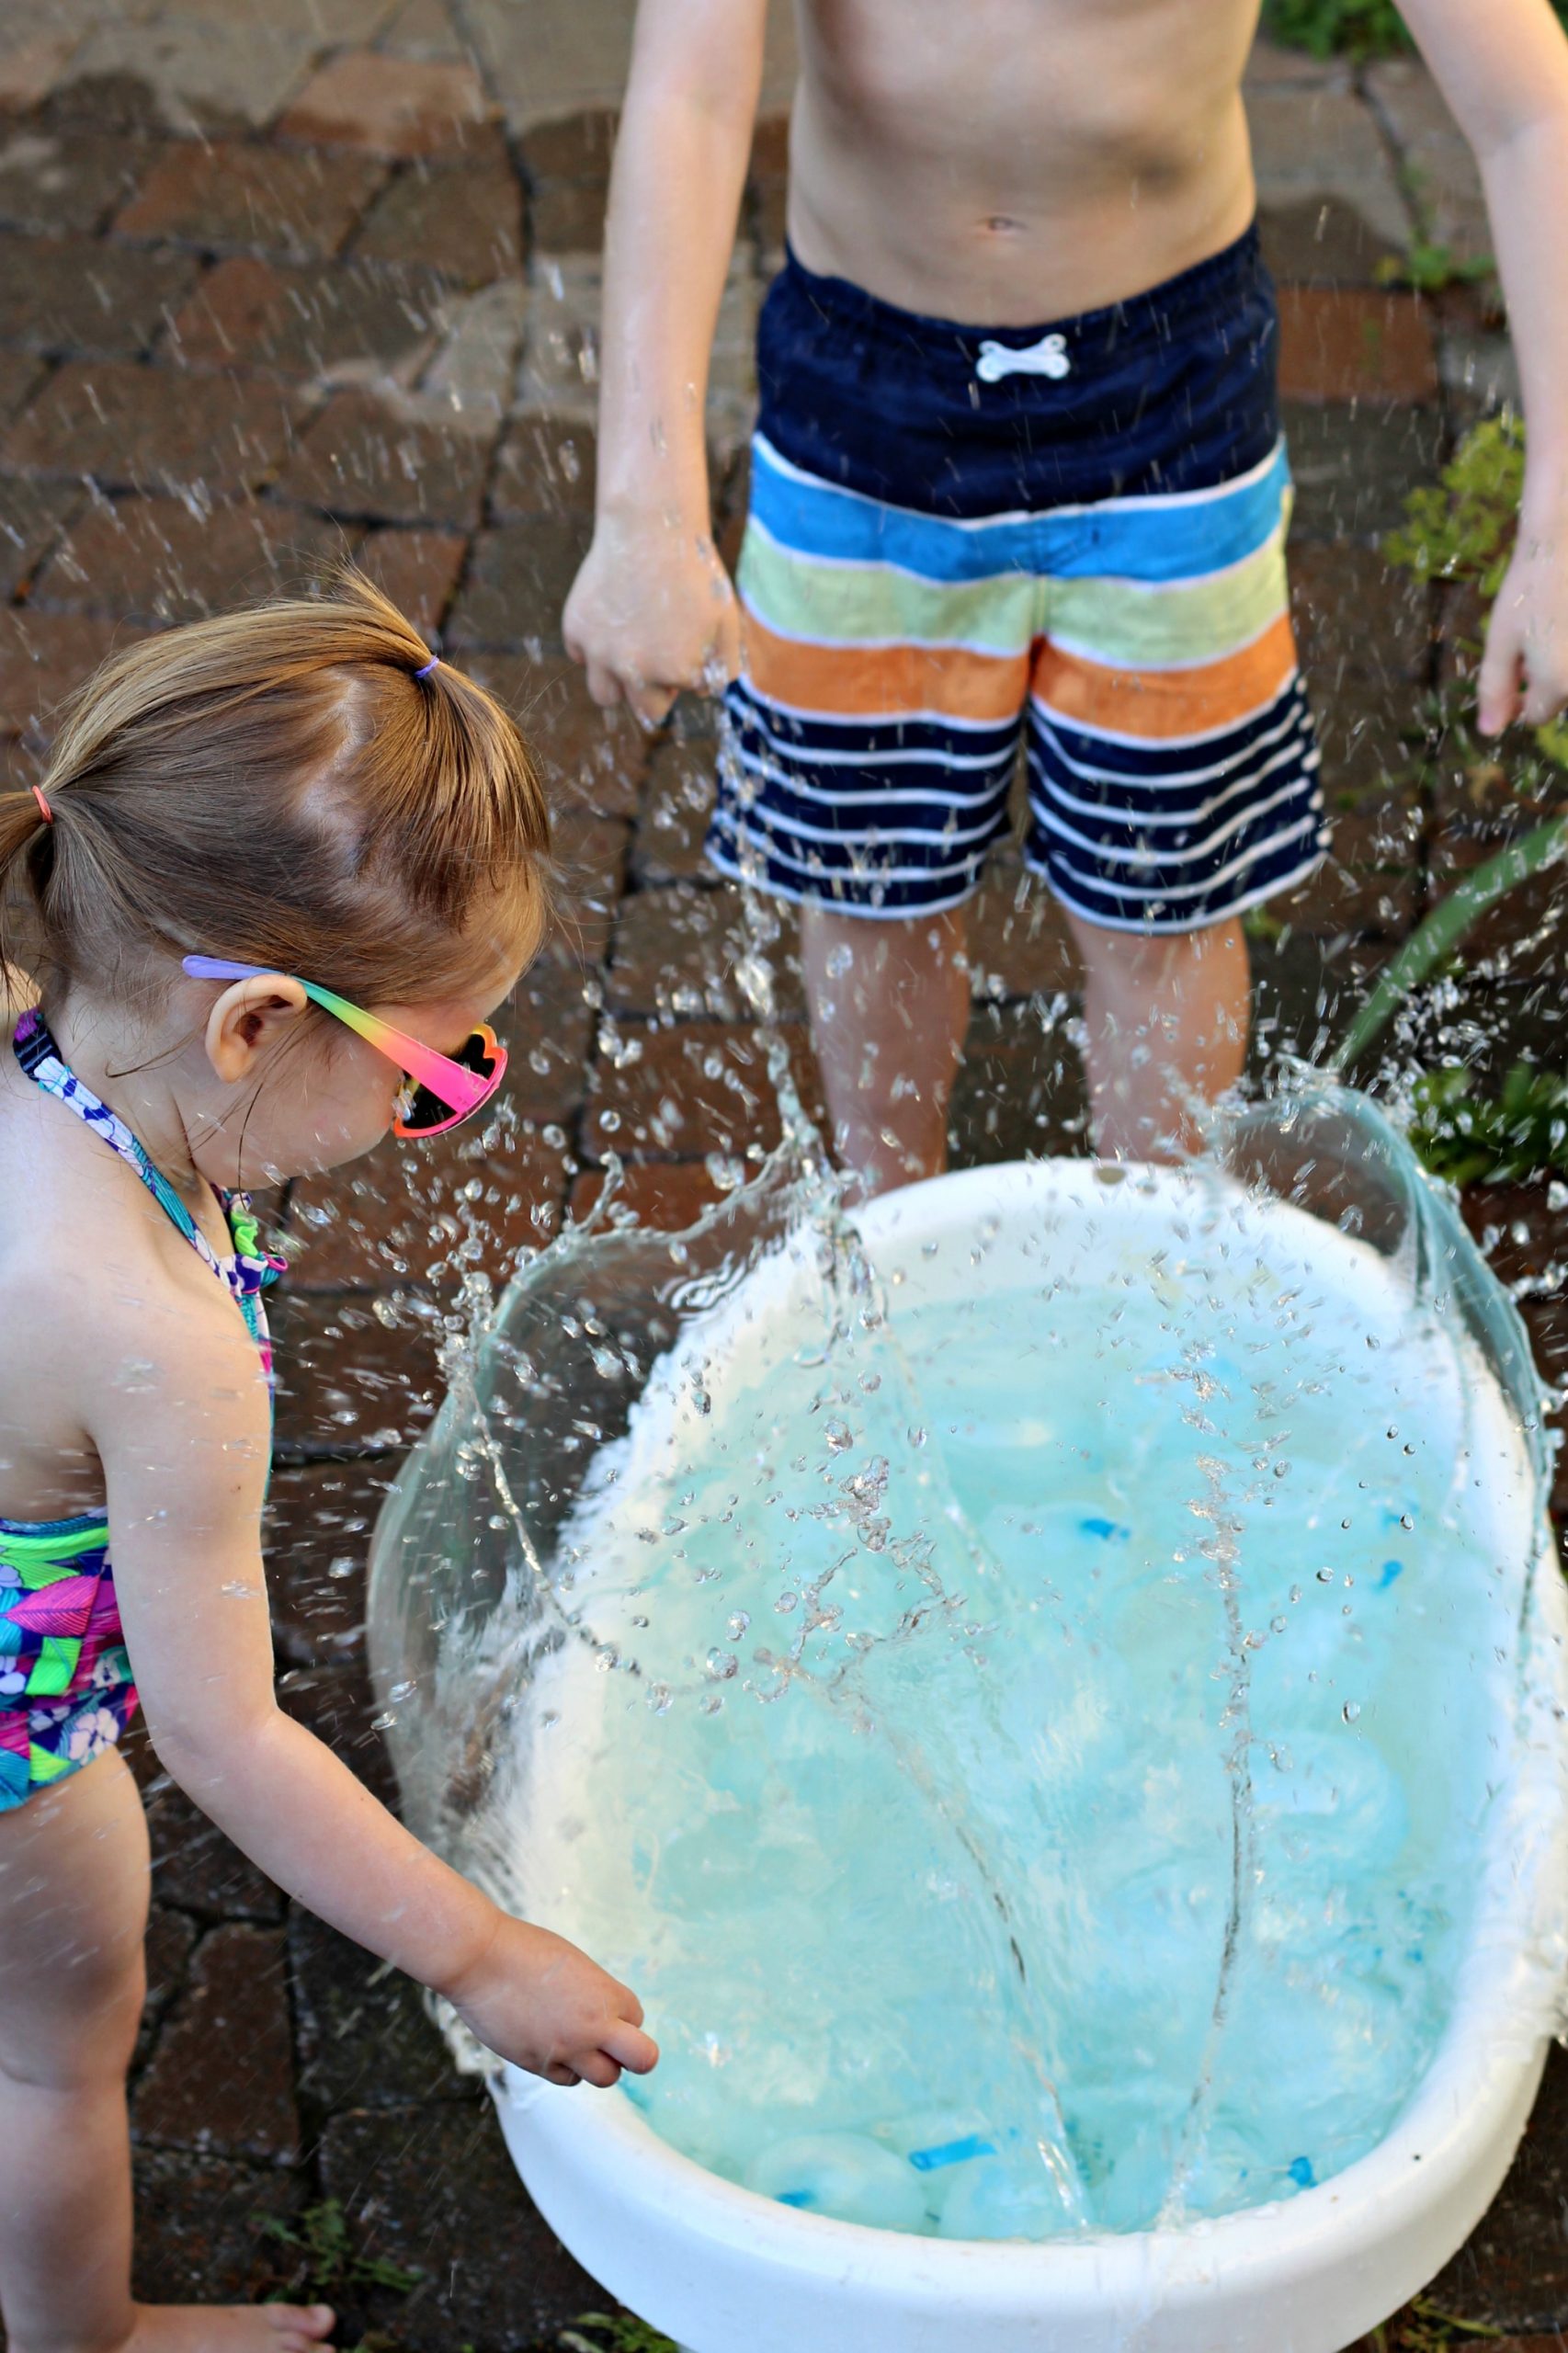 Summer Fun: Have a Blast with a Water Balloon Fight